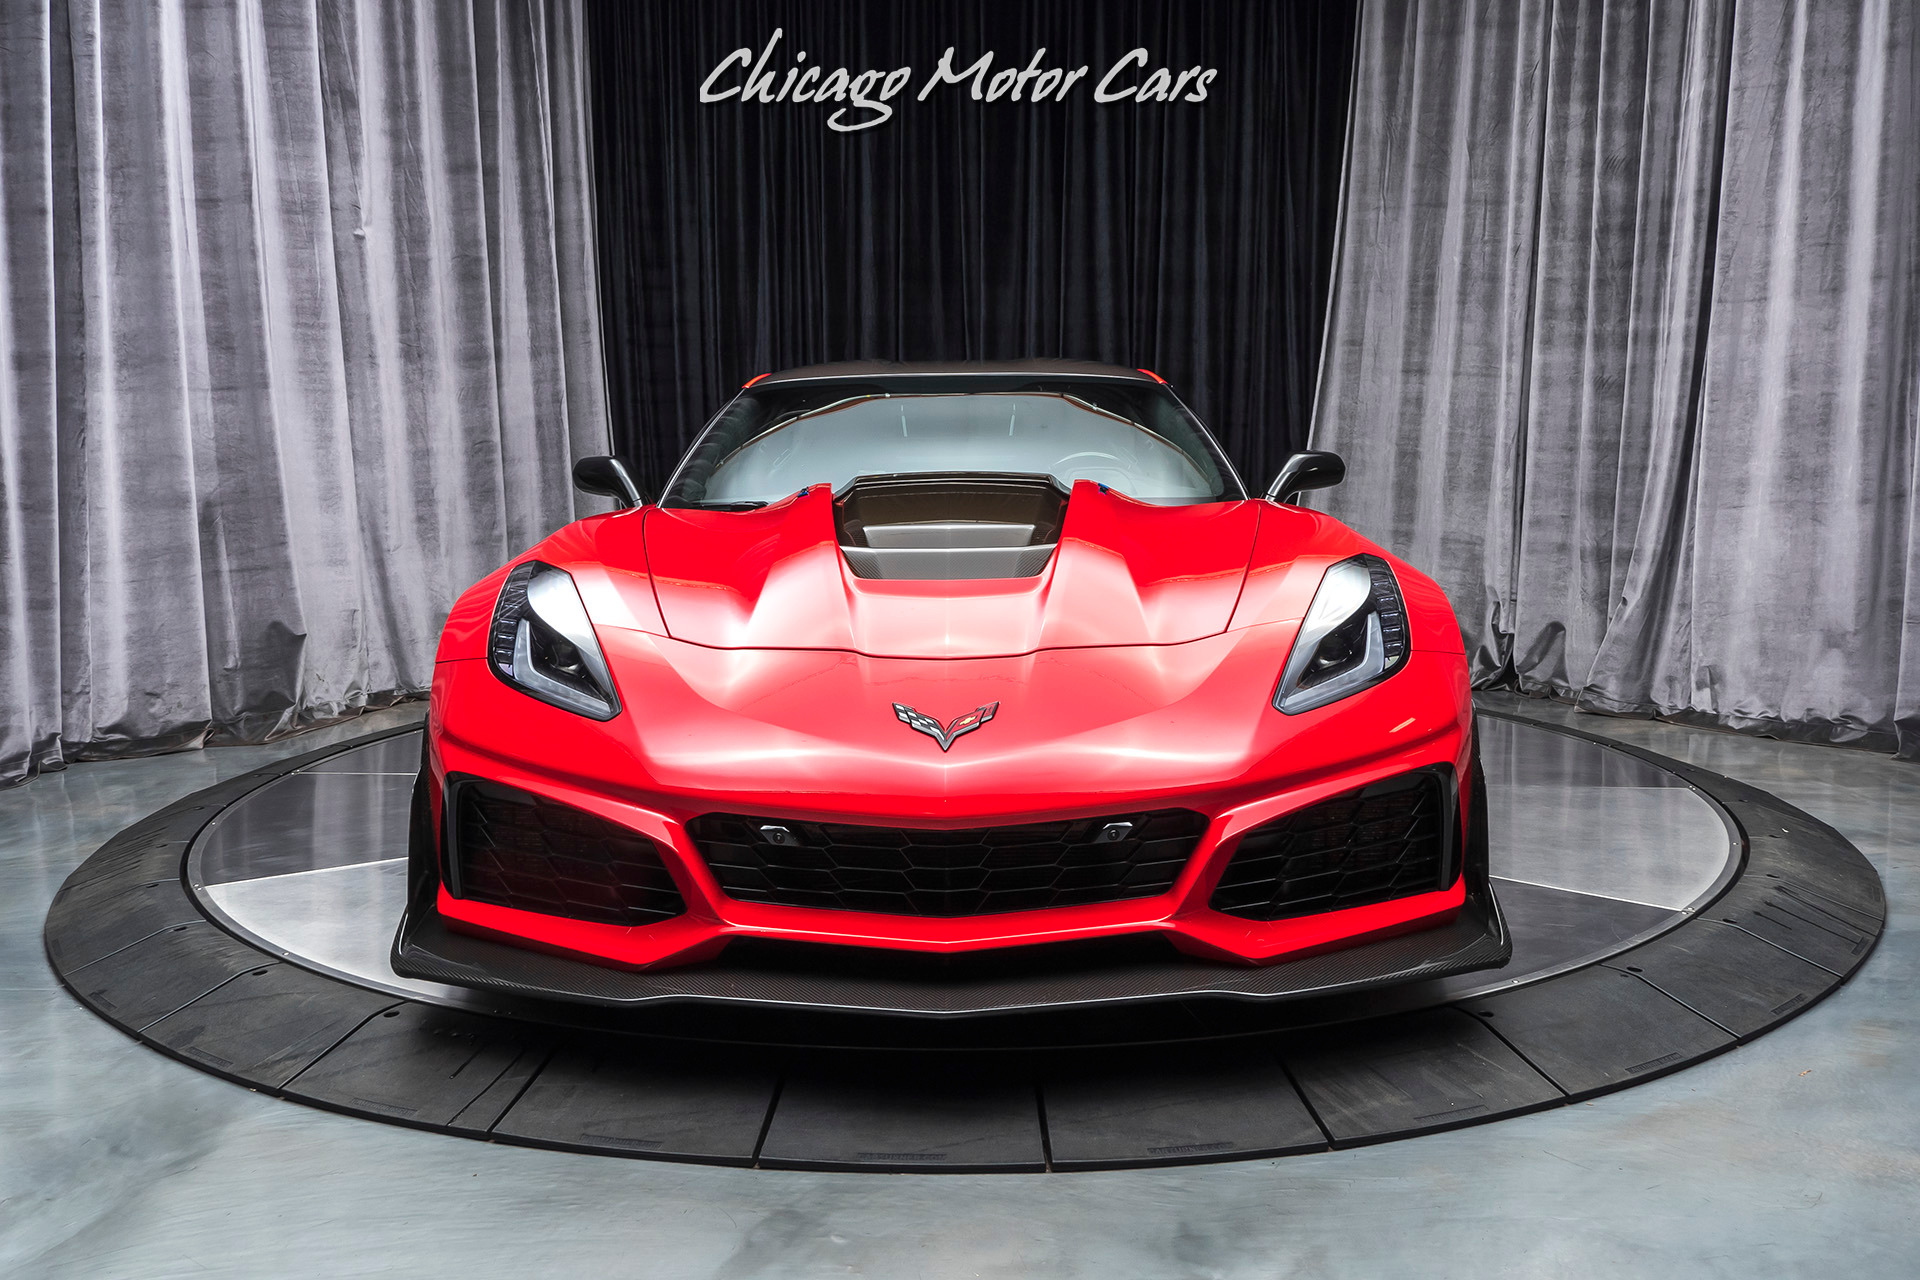 Used-2019-Chevrolet-Corvette-ZR1-3ZR-Coupe-MSRP-143k-ZR1-TRACK-PERFORMANCE-PACKAGE